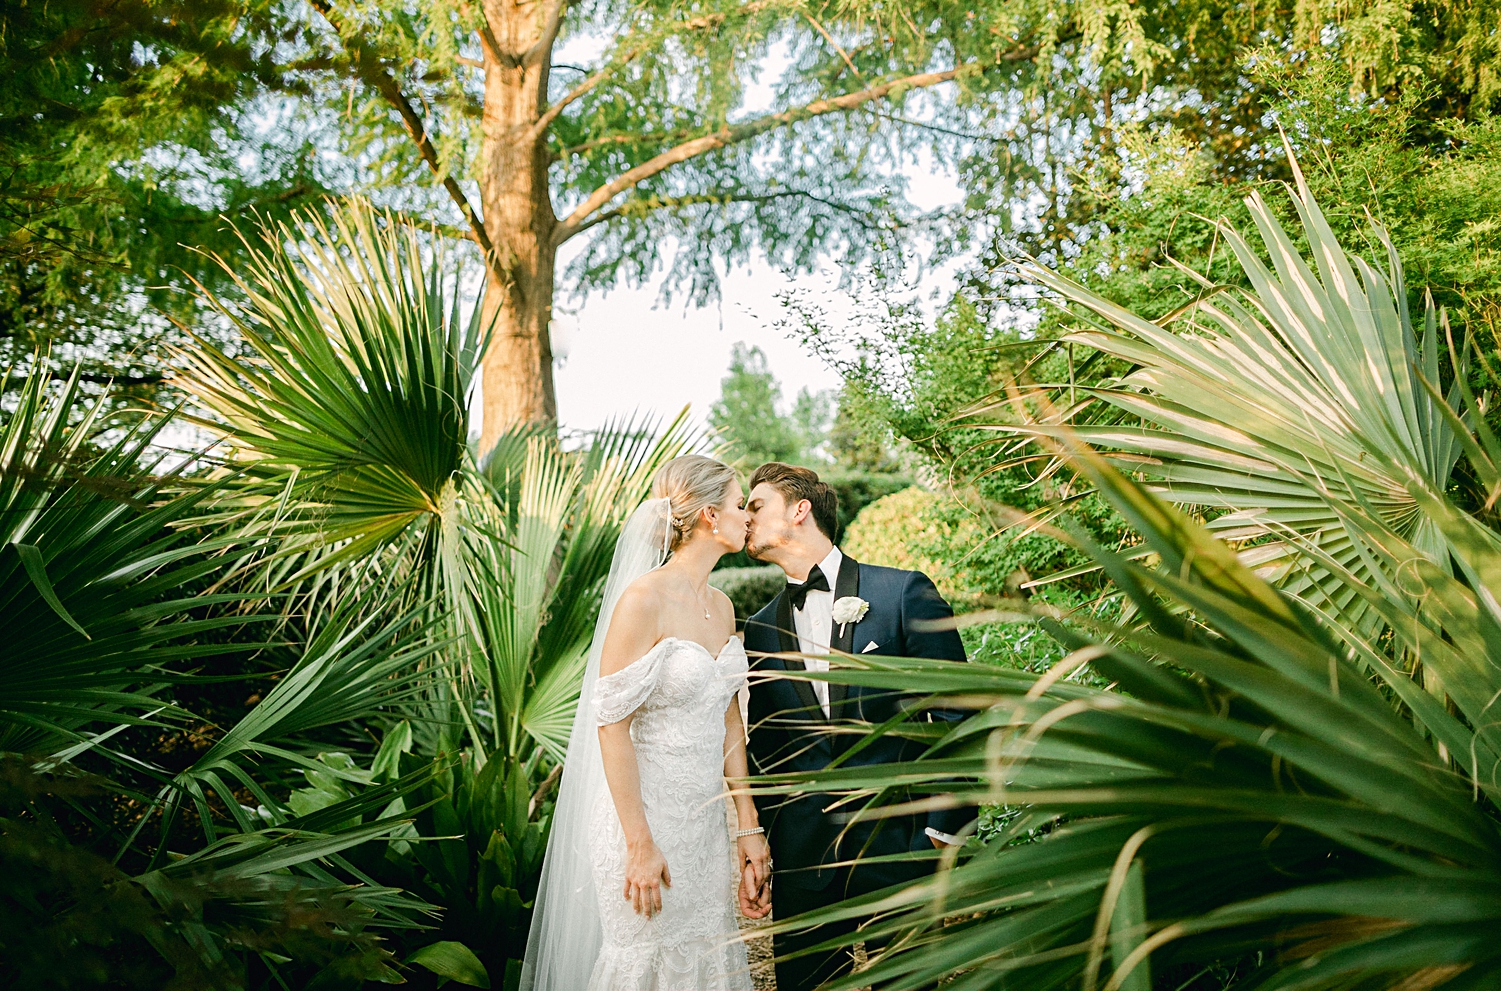 Bride in white wedding dress and veil and Groom in blue tuxedo kissing in green palm leaves